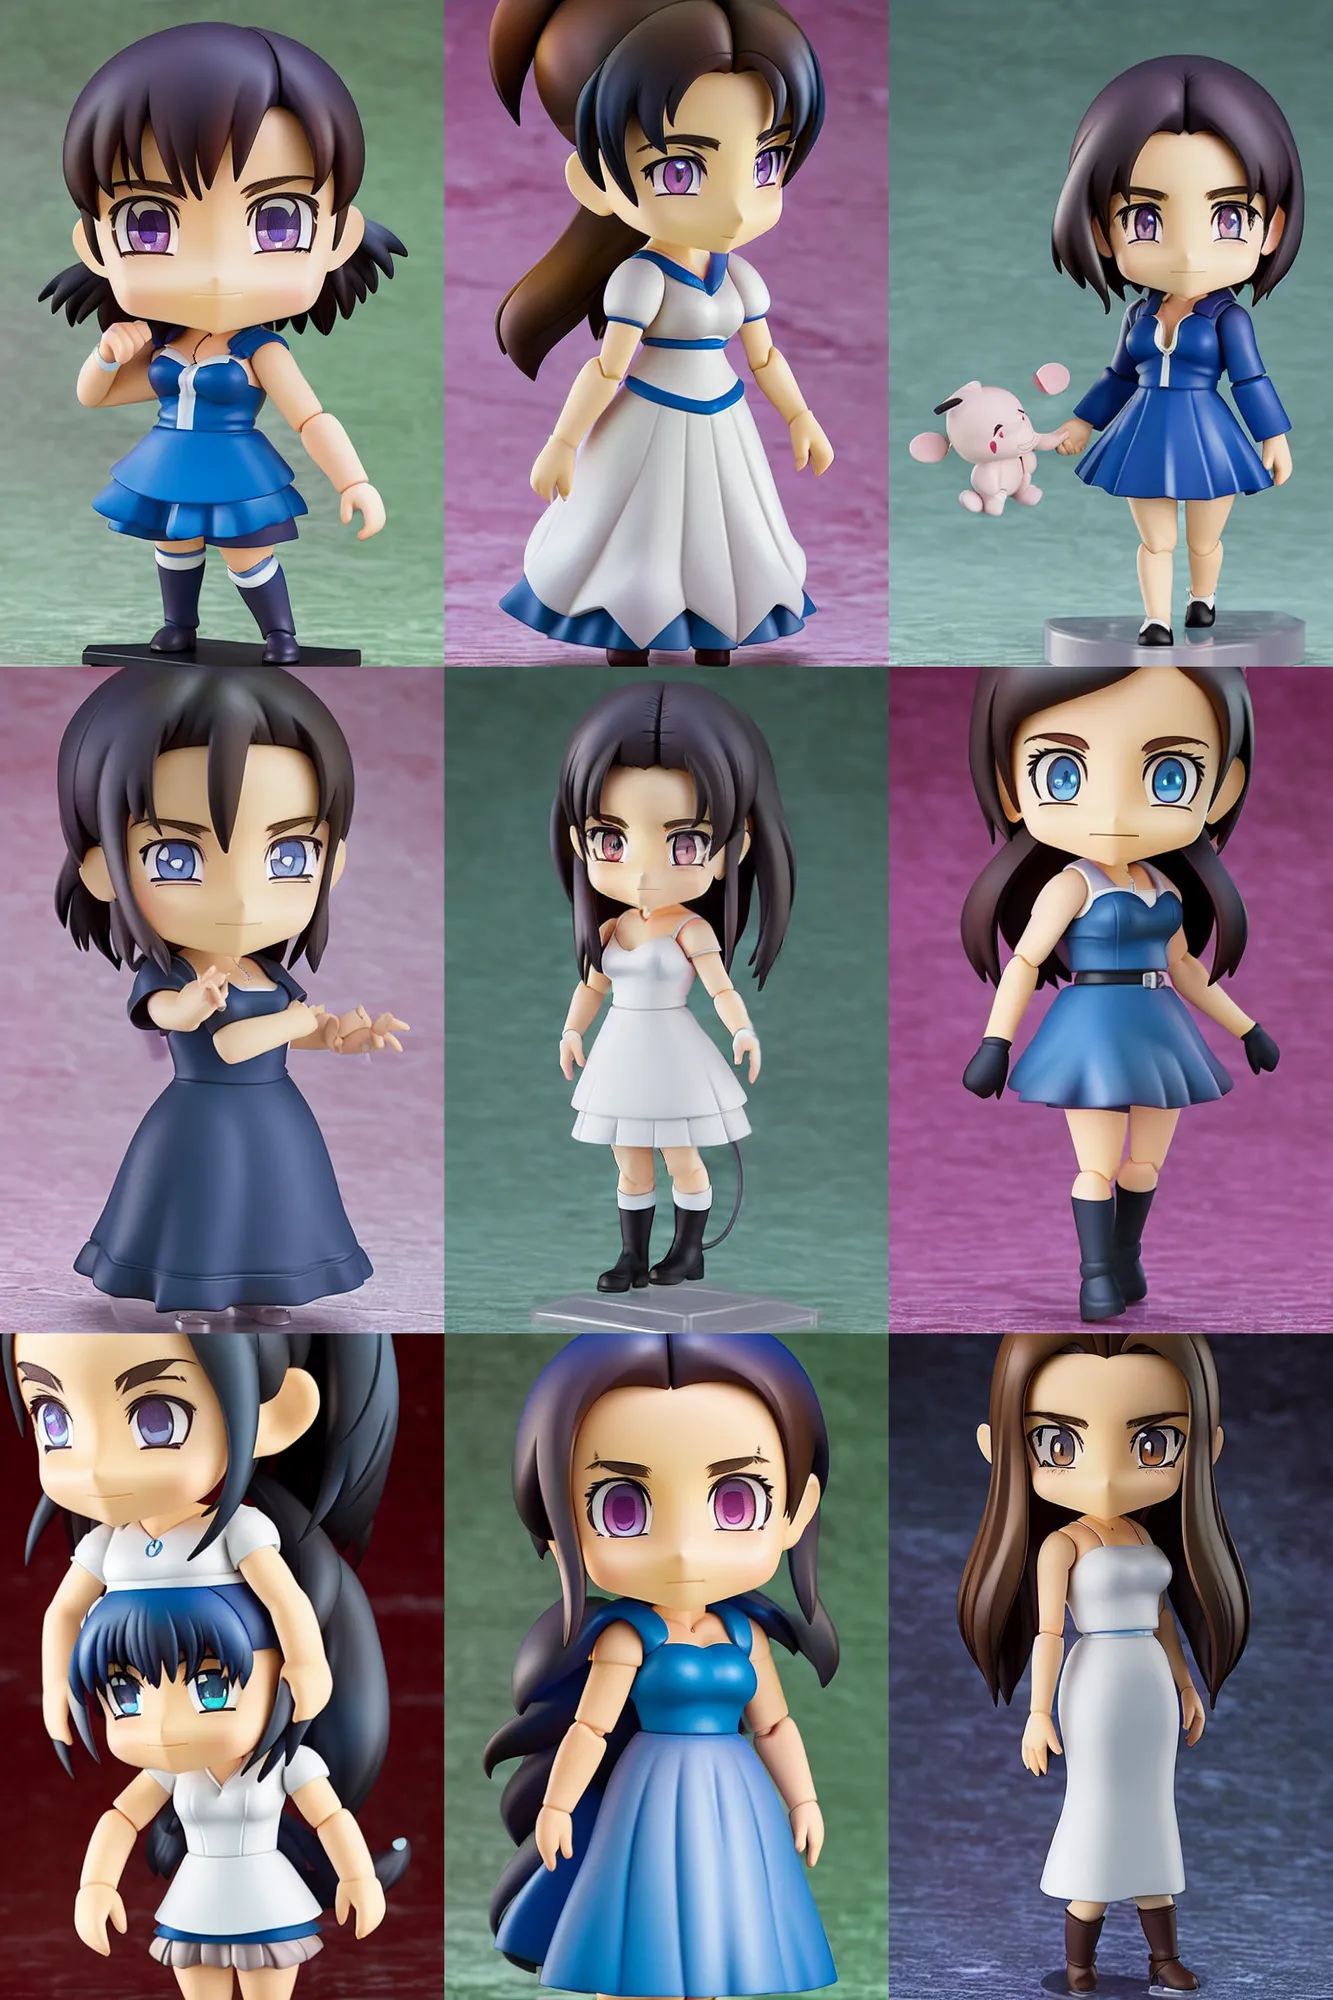 Prompt: jennifer connelly, an anime nendoroid of jennifer connelly, figurine, detailed product photo dramatic lighting